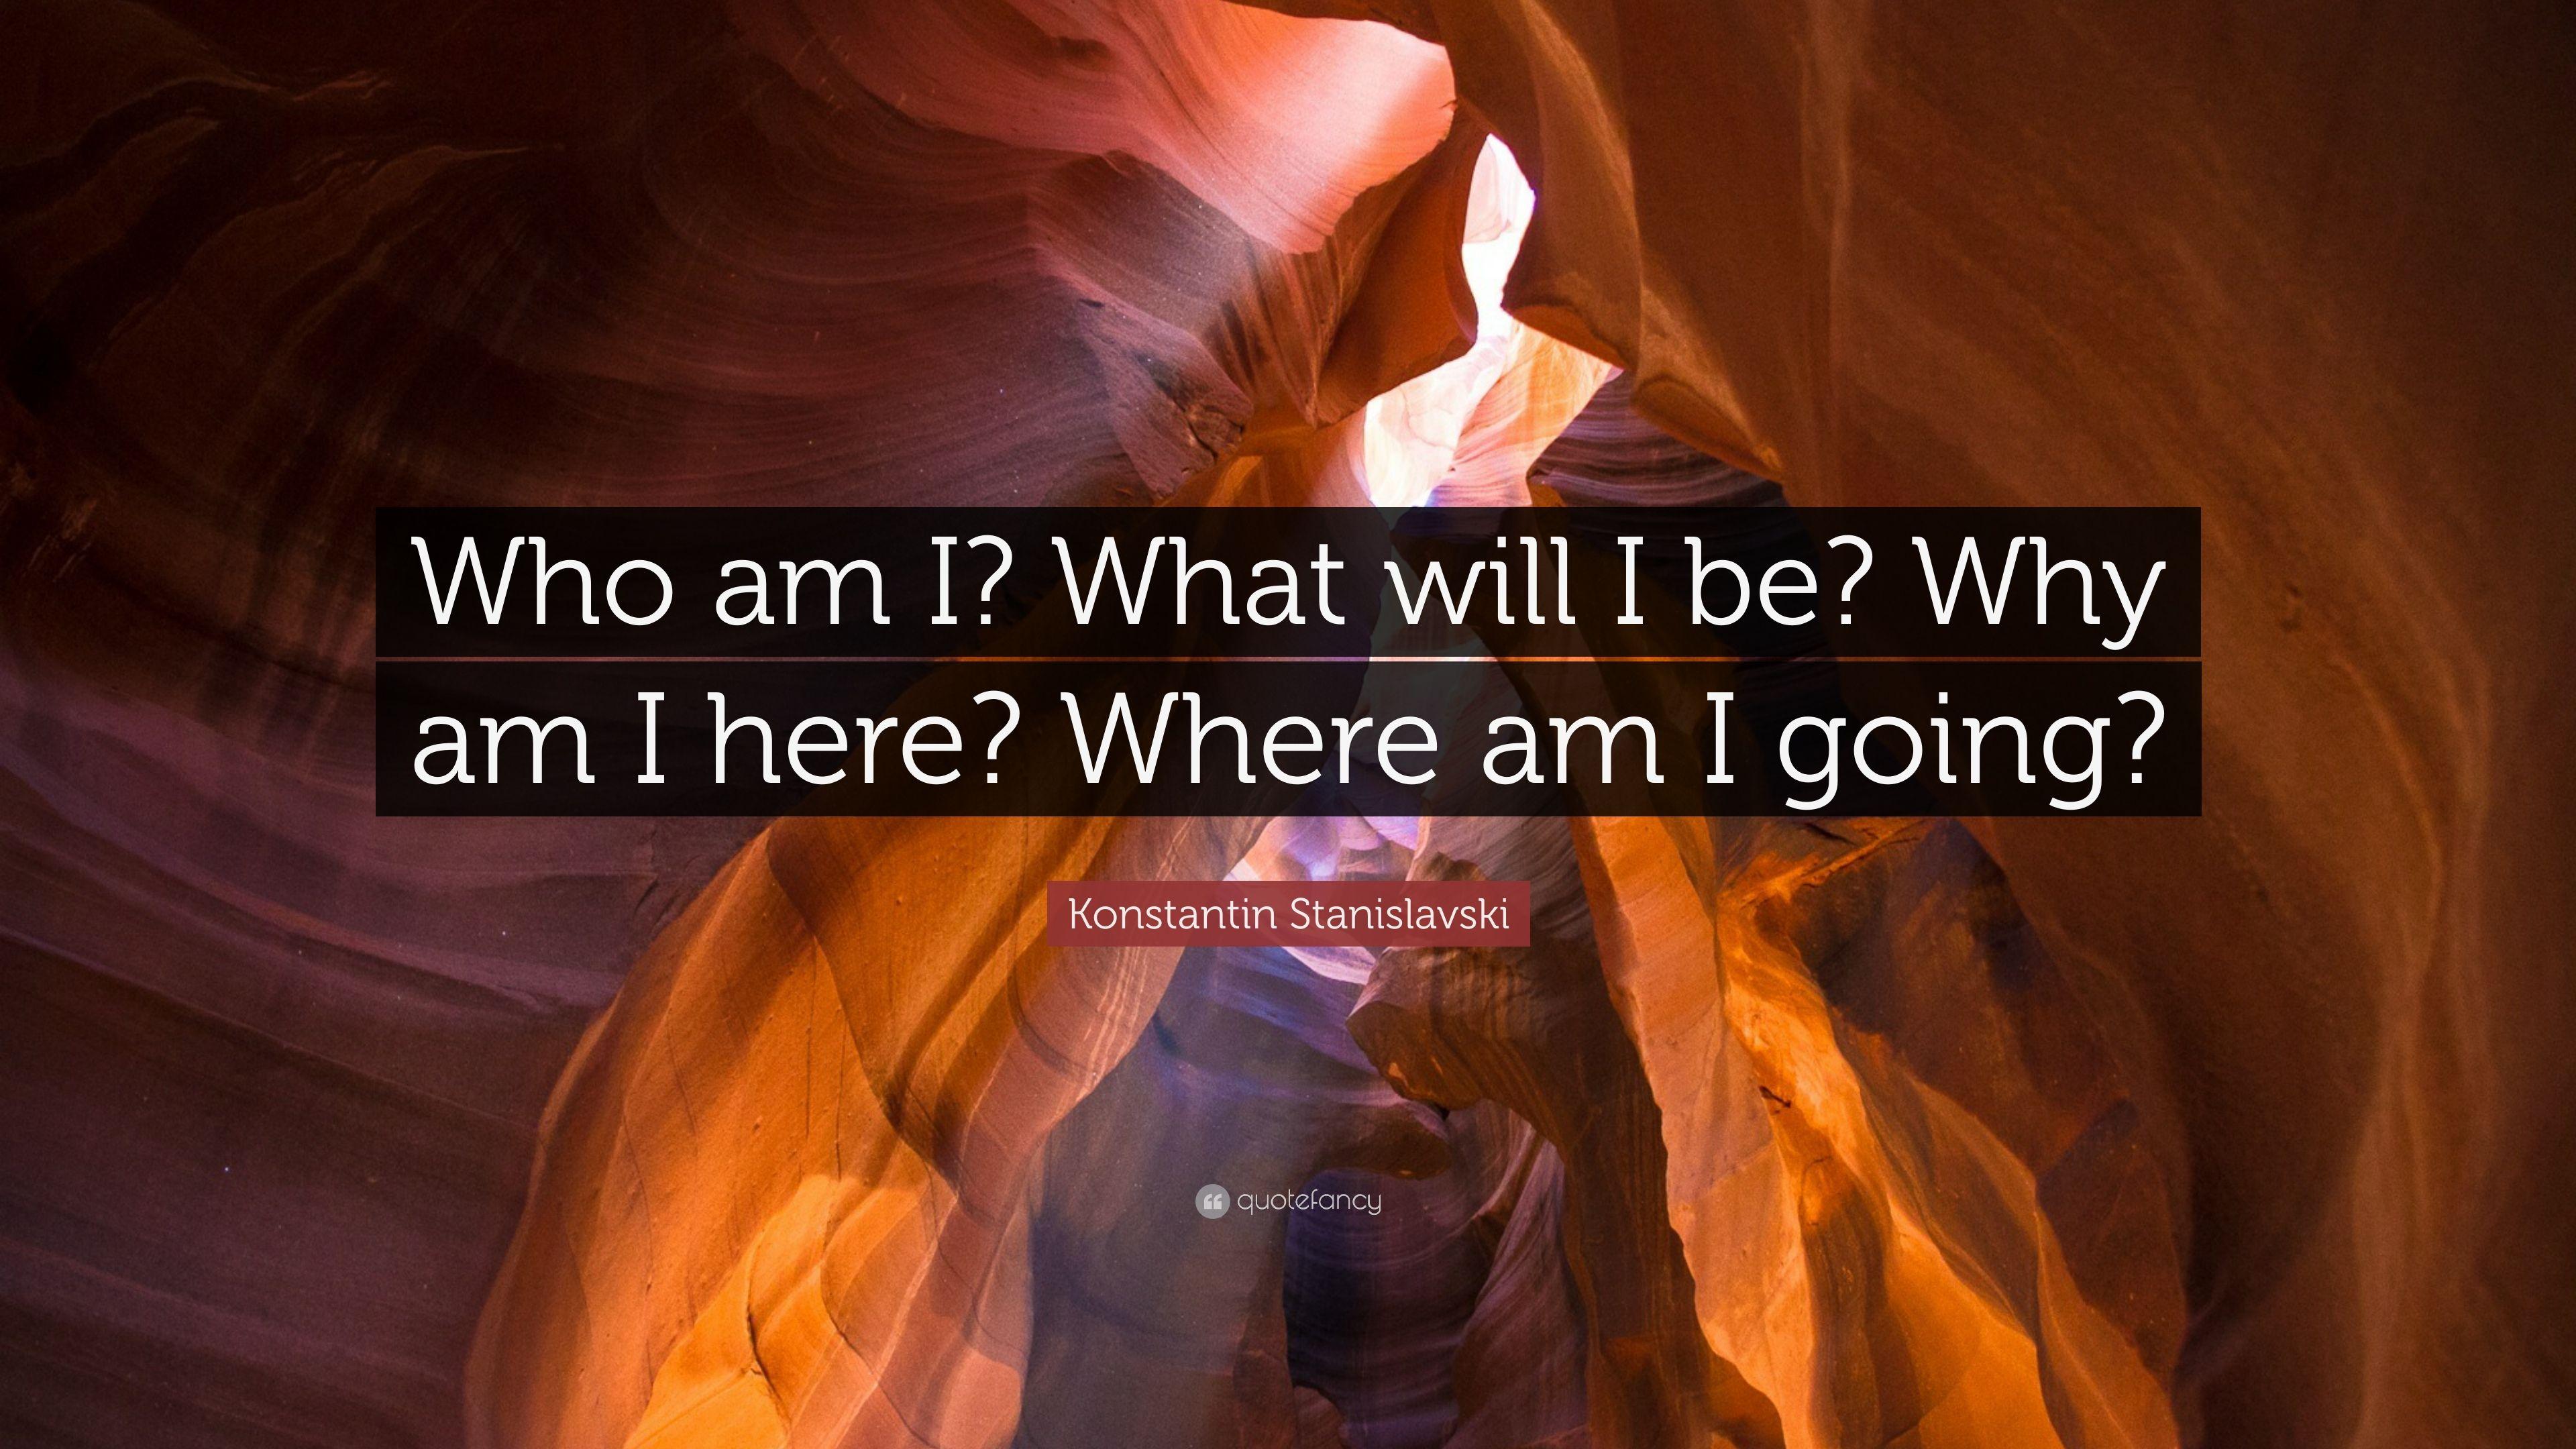 Konstantin Stanislavski Quote: “Who am I? What will I be? Why am I